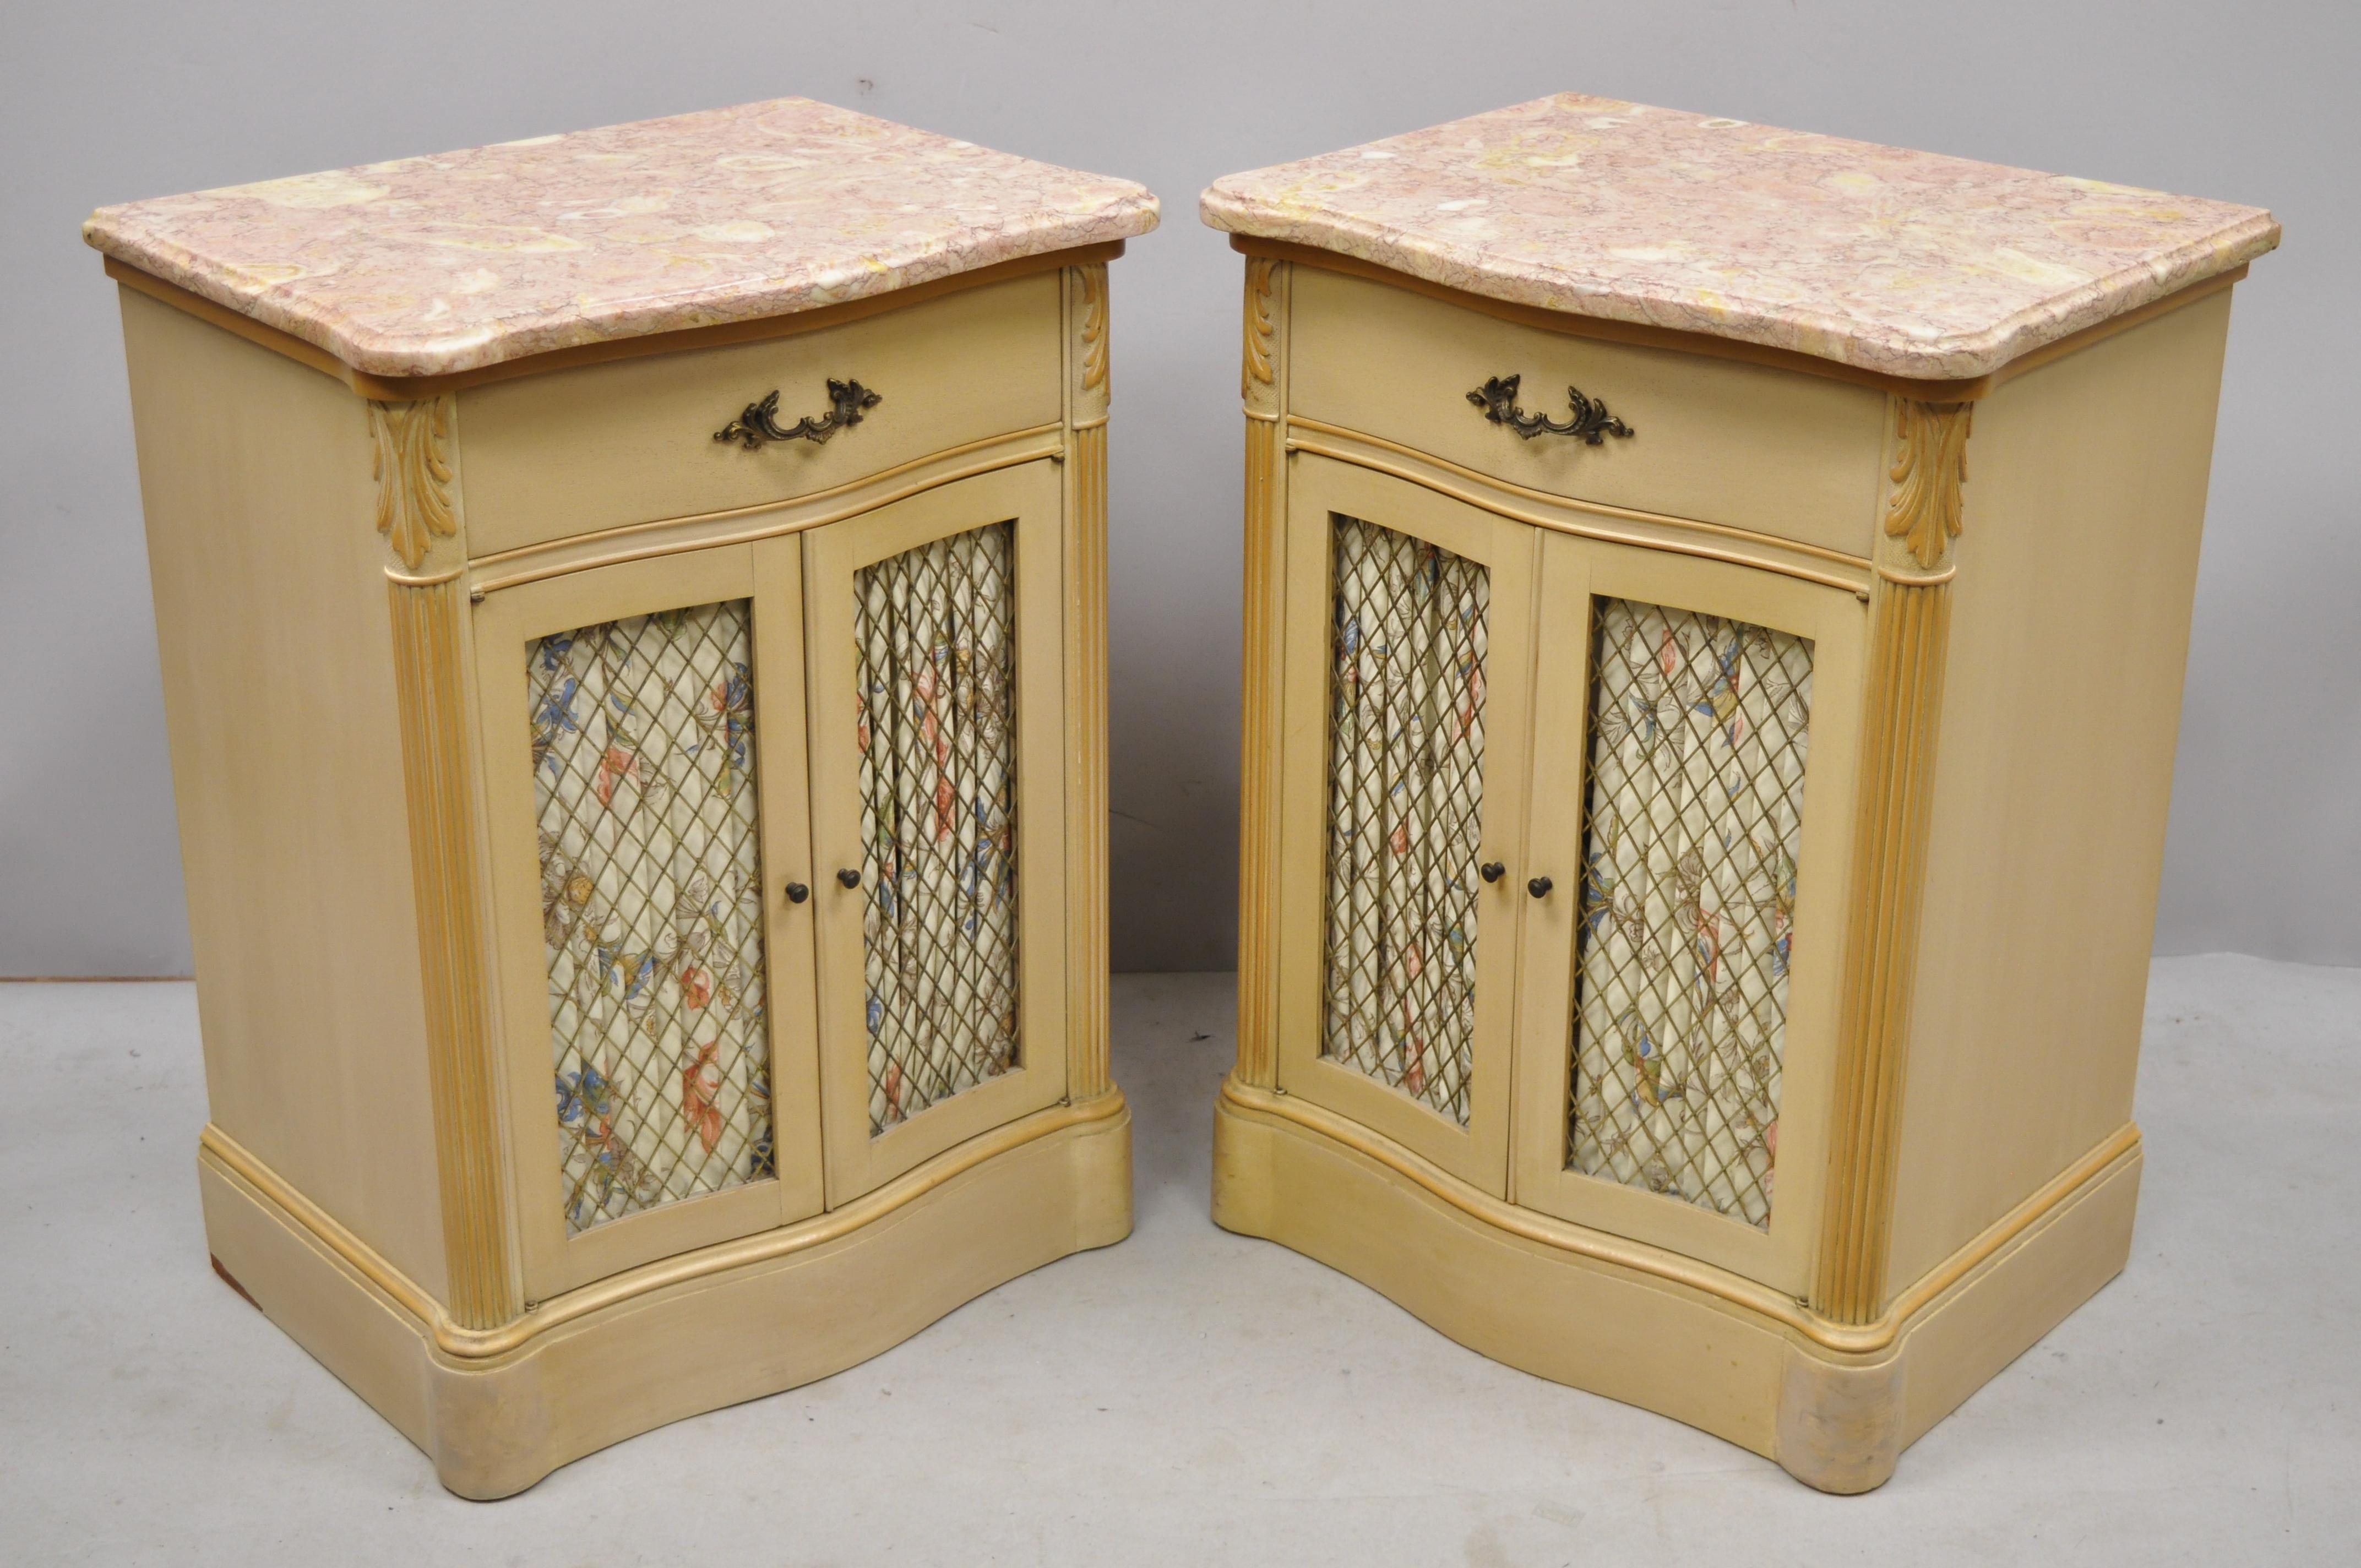 Pair of antique pink marble top serpentine front French Victorian style nightstands cabinets. Listing includes pink marble tops, brass lattice door fronts with curtains, serpentine fronts, 2 swing doors, 1 dovetailed drawer, quality American